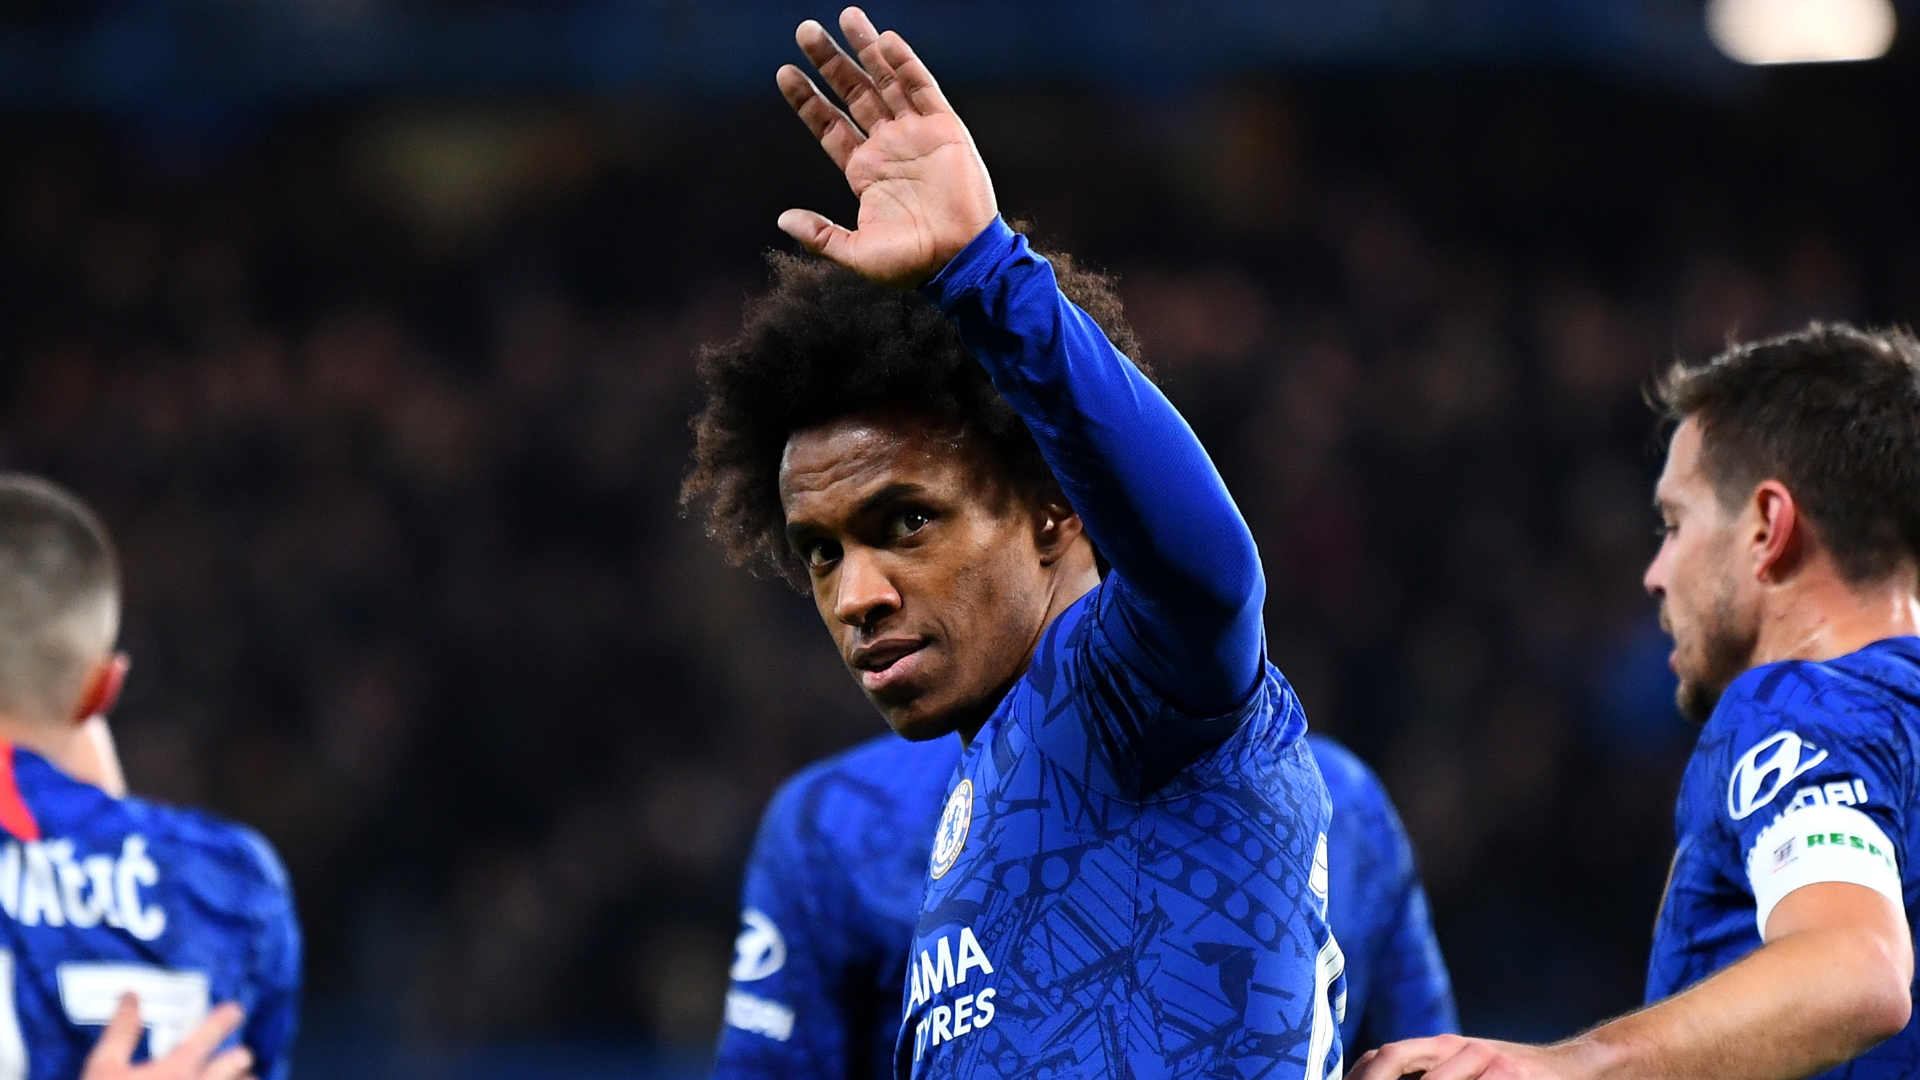 Willian open to temporary Chelsea deal but long-term future remains in doubt